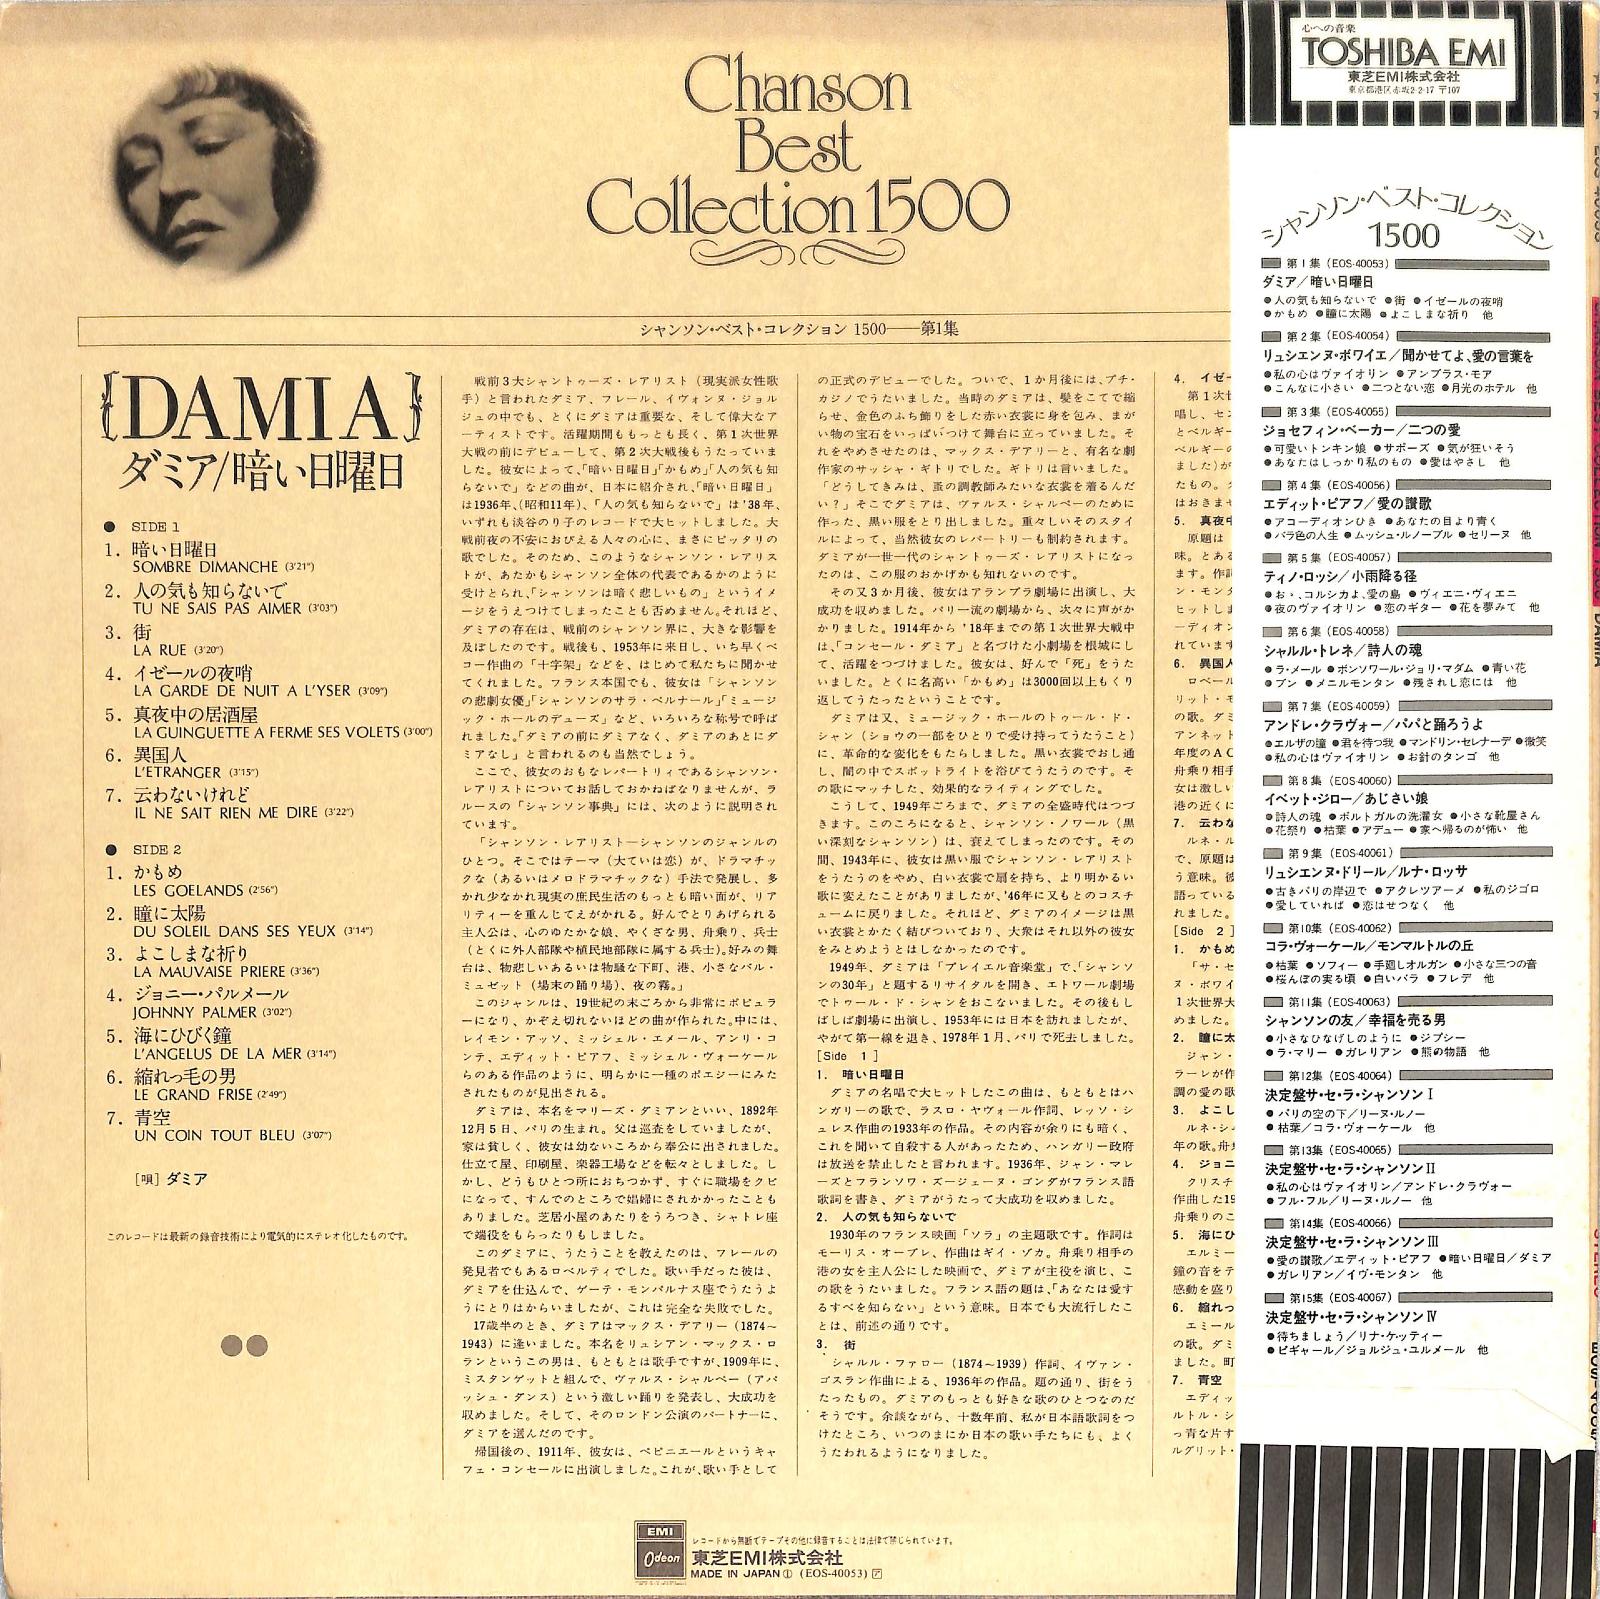 DAMIA - Chanson Best Collection 1500